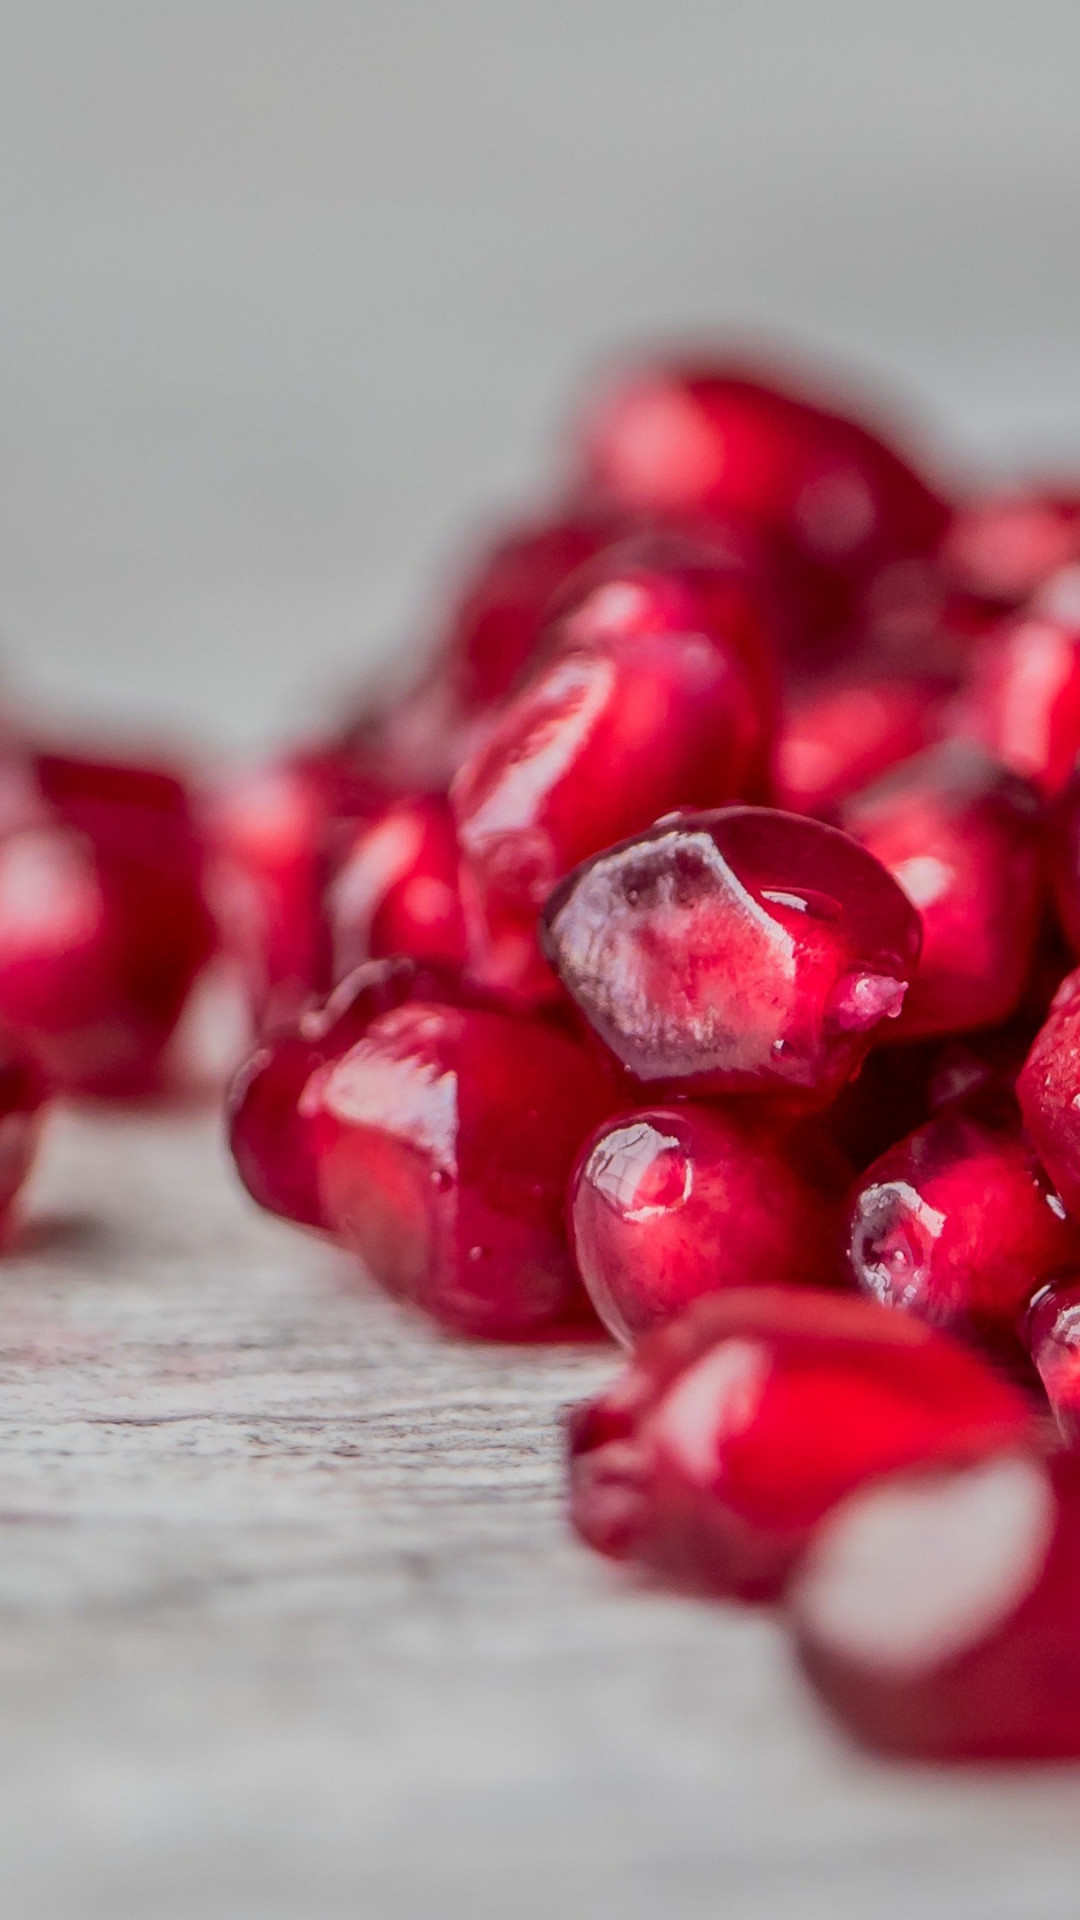 Seeds: Pomegranates, Packed with crunchy, juicy edible arils. 1080x1920 Full HD Background.